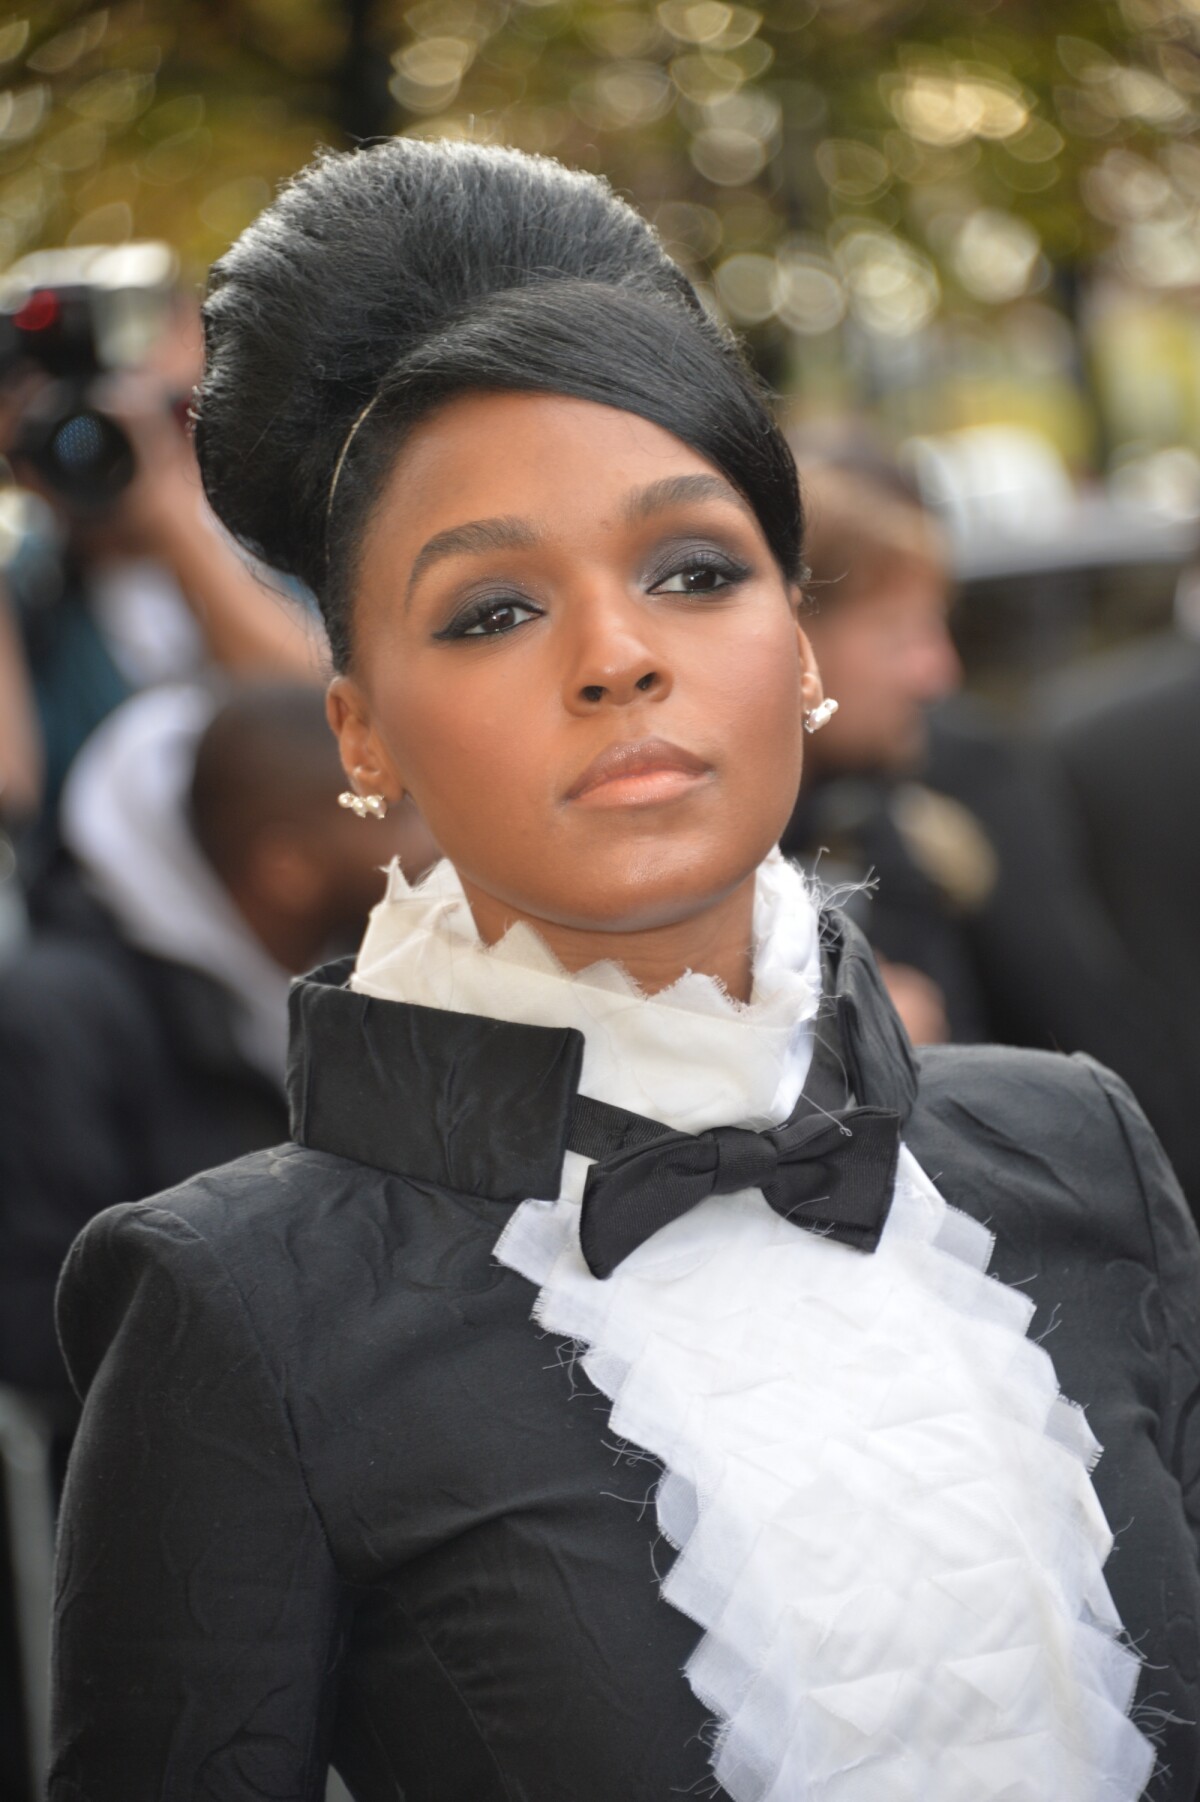 Janelle Monáe at Chanel Spring/Summer 2016 Paris Fashion Week wearing dress  from the Fall 2015 Collection, Chanel accessories and sandals by Oscar  Tiye. [600x900] : r/fashionporn